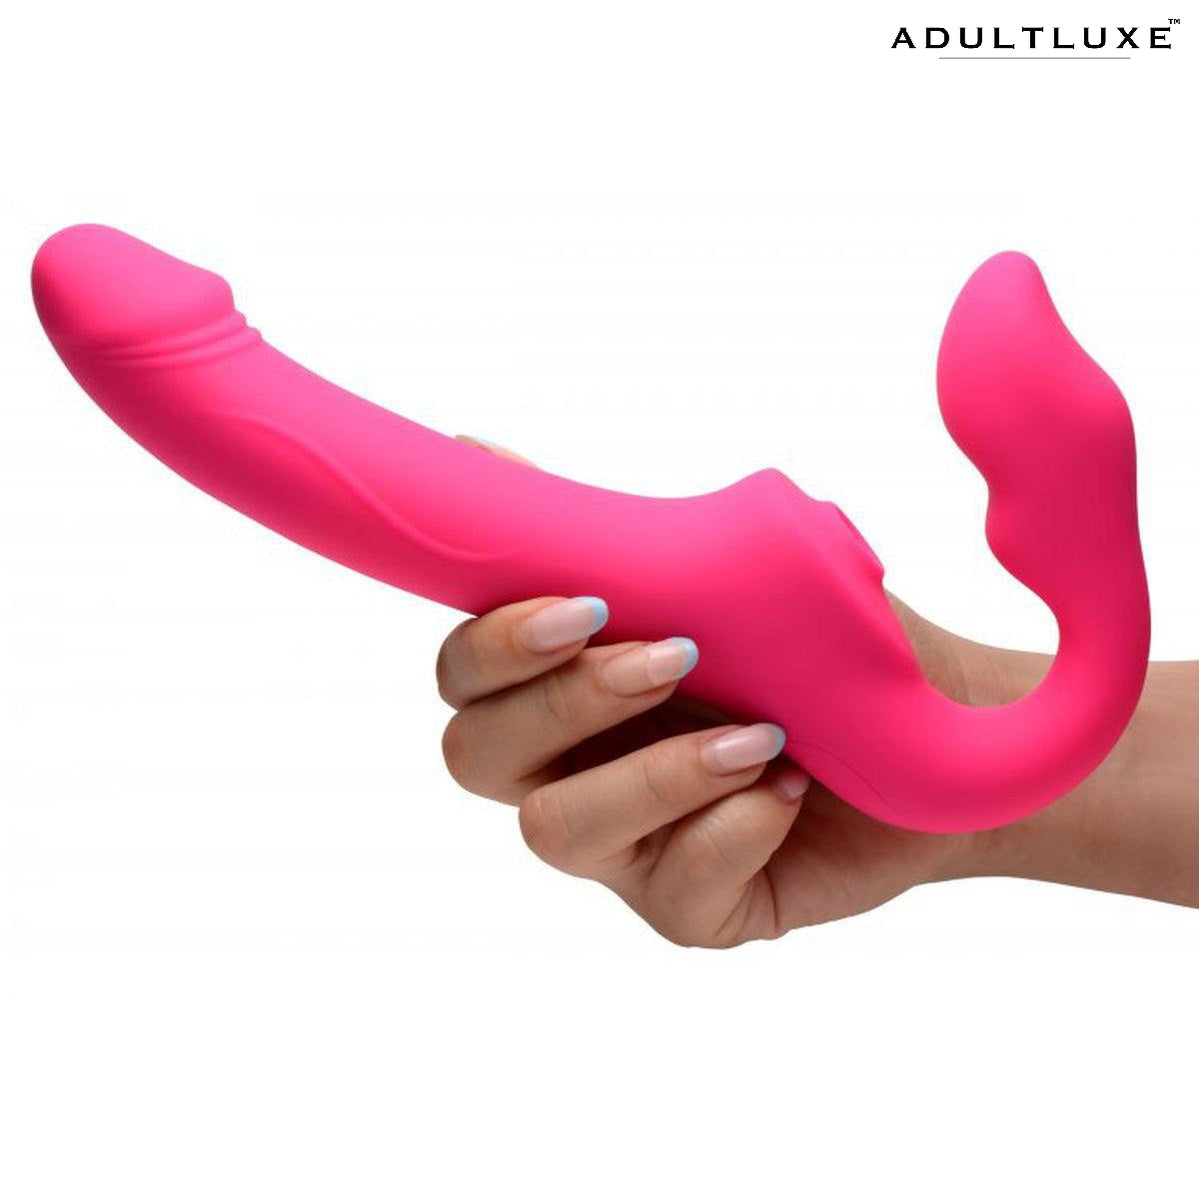 Strap U Licking & Vibrating Strapless Strap-on with Remote